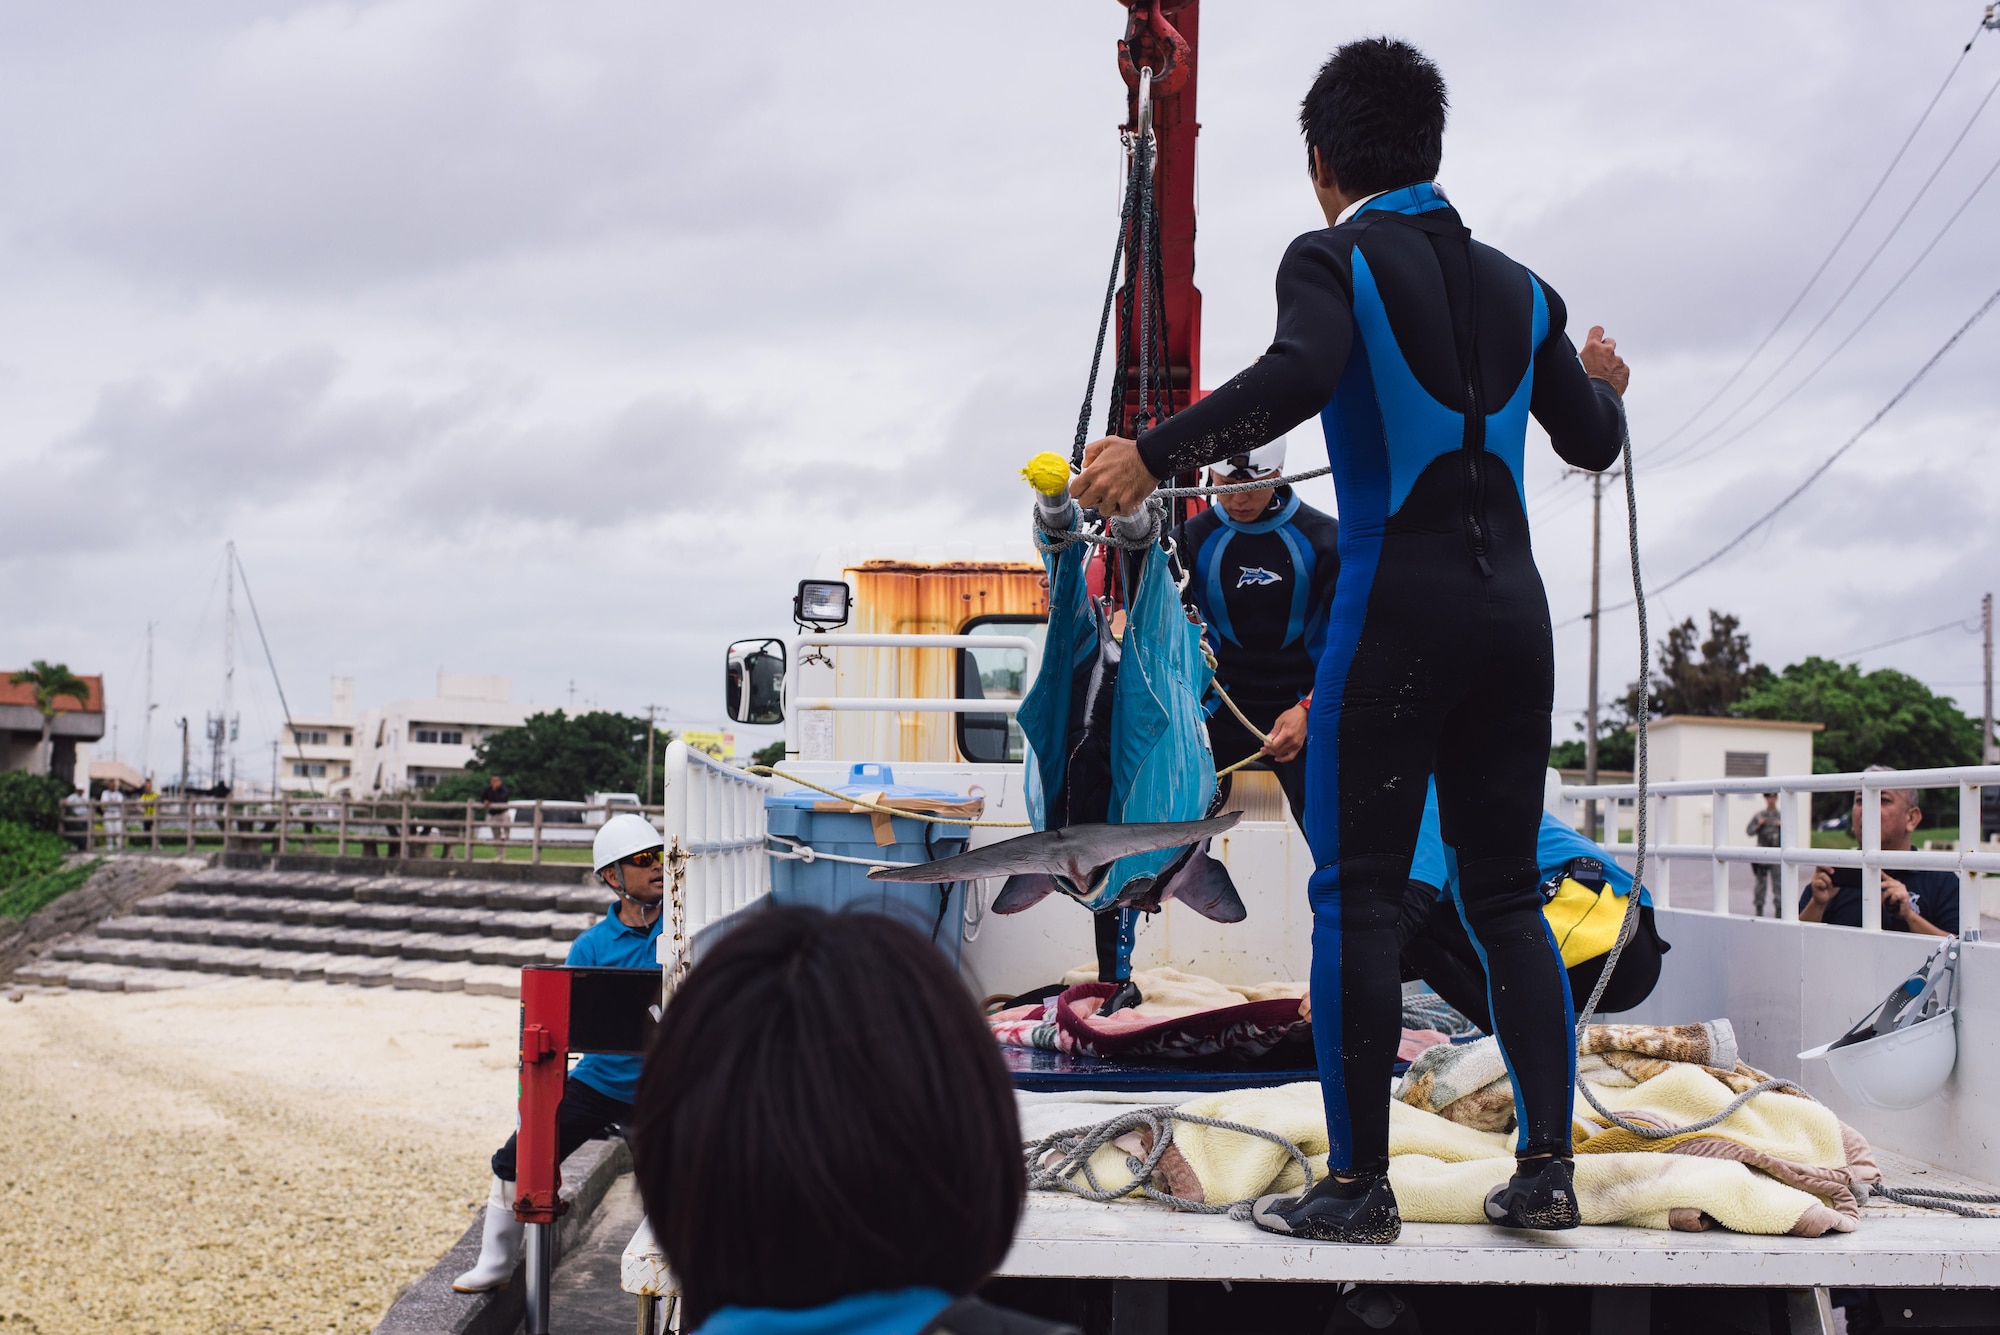 A veterinarian team from the Okinawa Charumi Aquarium loads an injured dwarf sperm whale onto the back of a vehicle April 17, 2017, at Kadena Marina, Japan. The team waited for the whale to stabilize before beginning the hour-long journey to the aquarium where the whale is currently under medical care. (U.S. Air Force photo by Senior Airman Omari Bernard/Released)